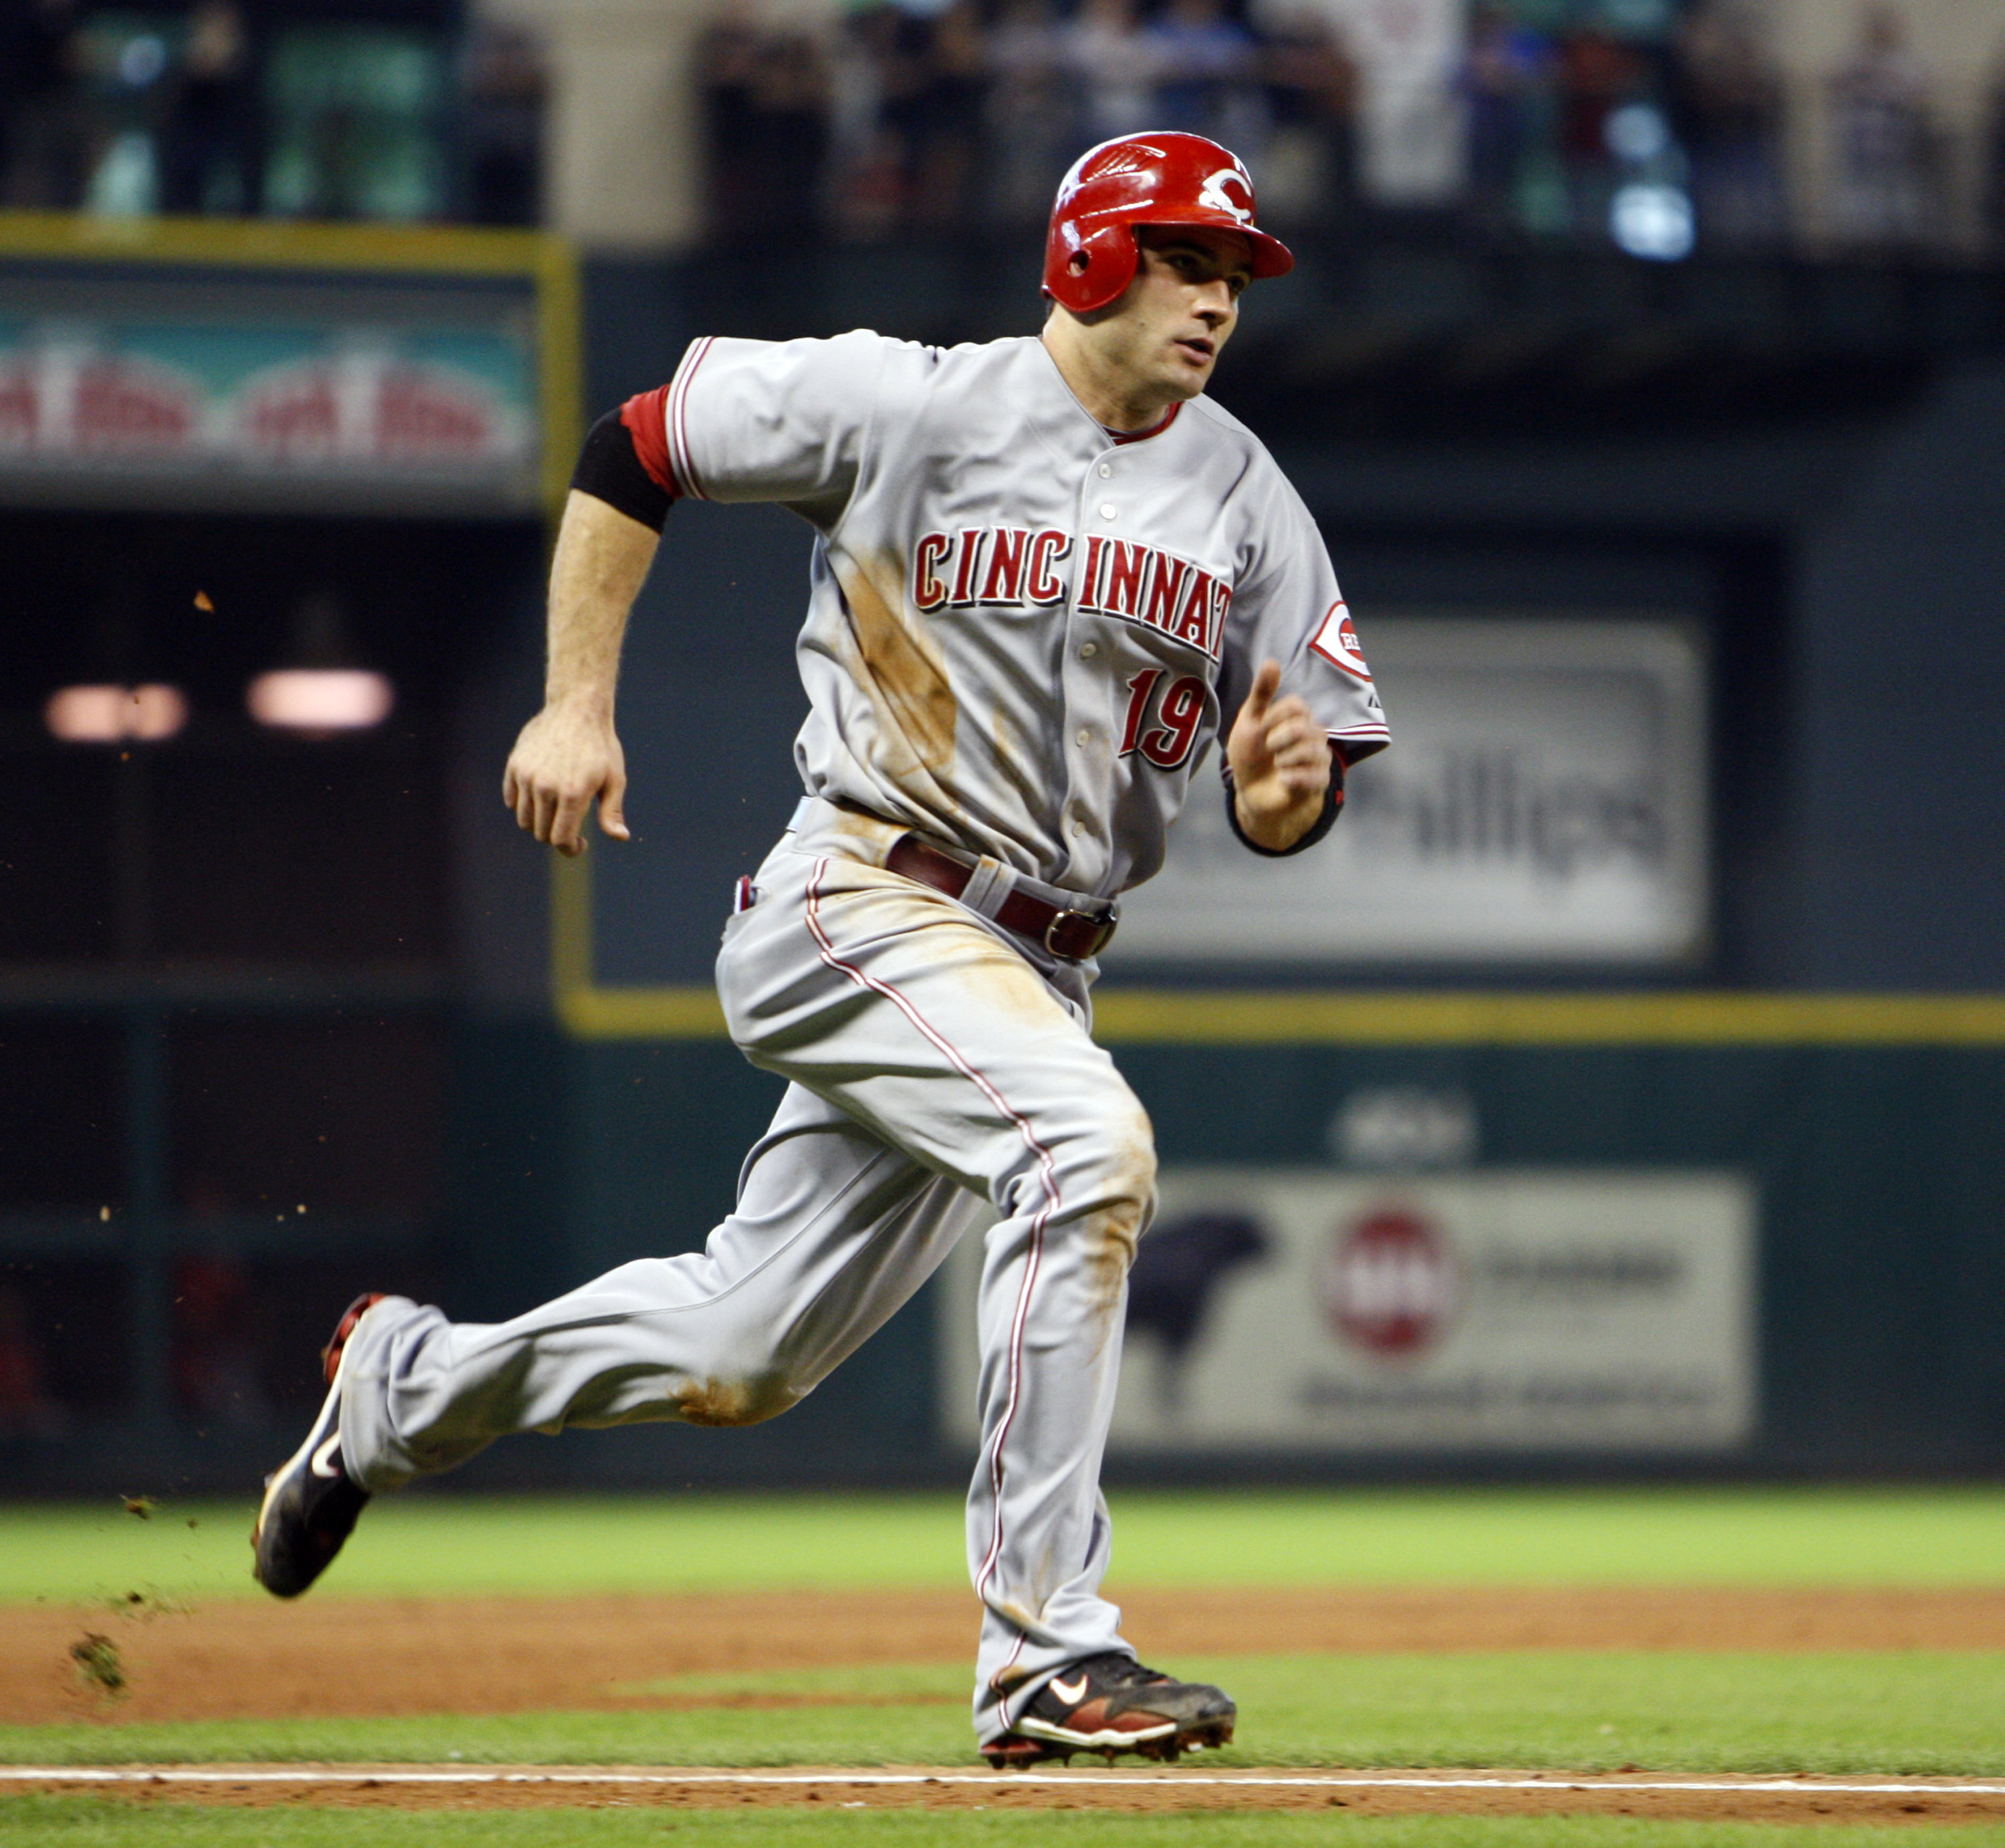 HOUSTON - SEPTEMBER 19:  Joey Votto #19 of the Cincinnatti Reds scores in the eighth inning against the Houston Astros on a single by Jay Bruce at Minute Maid  Park on September 19, 2010 in Houston, Texas.  (Photo by Bob Levey/Getty Images)